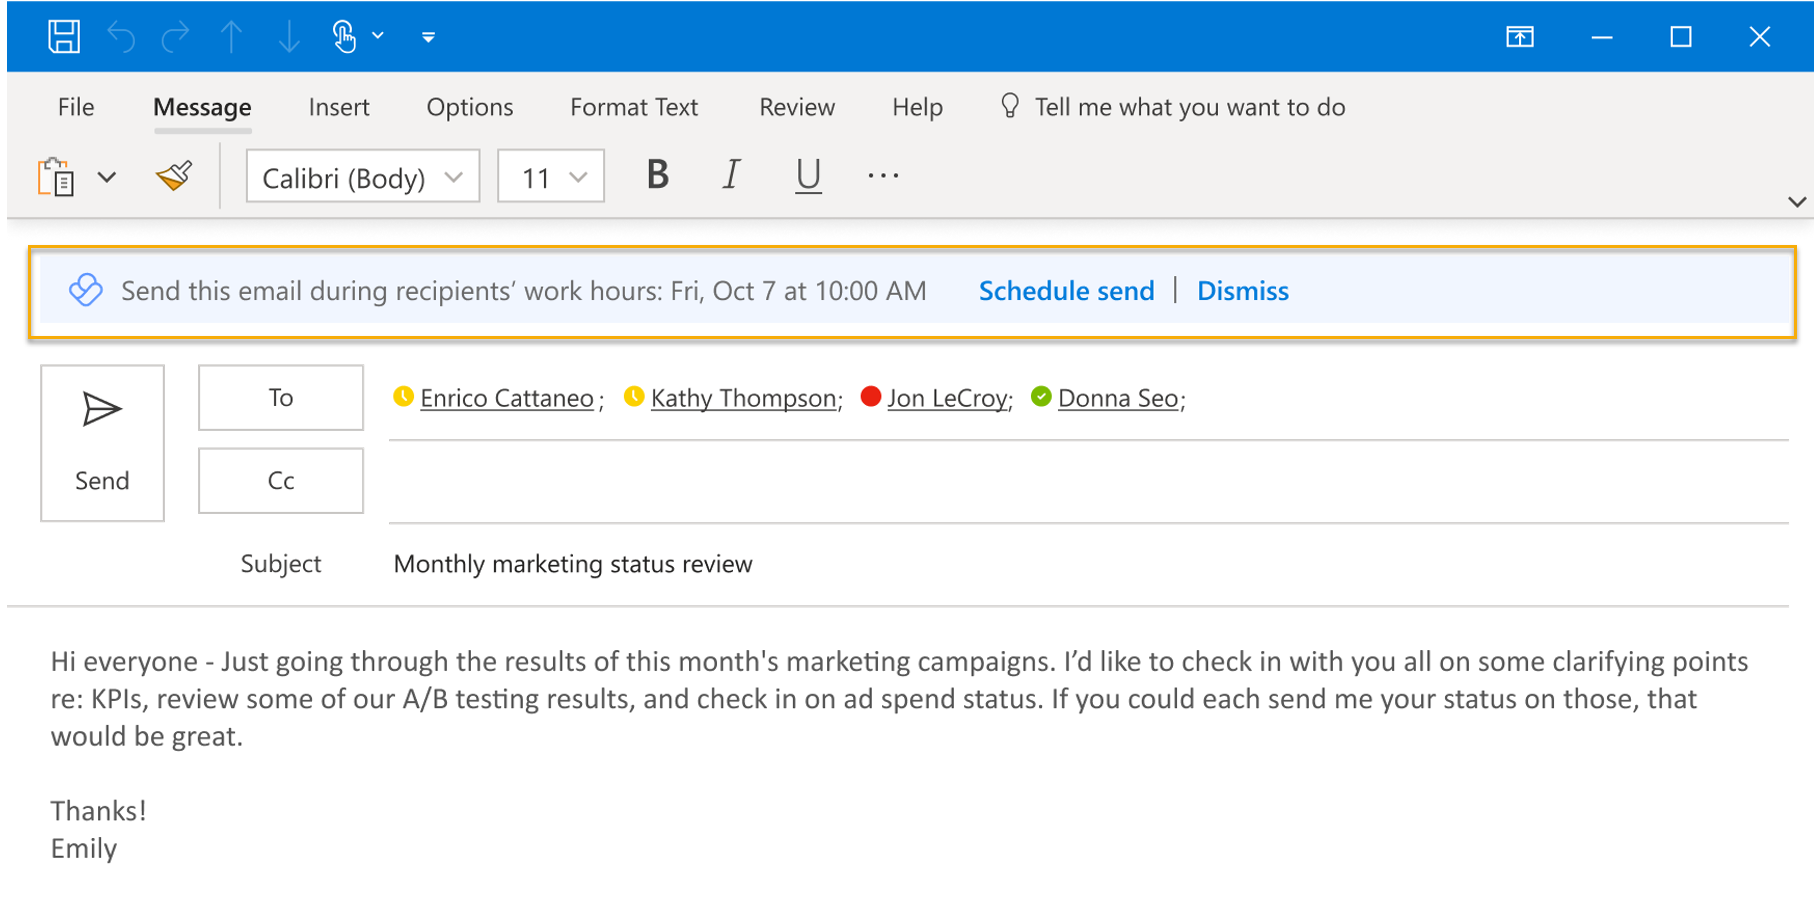 Screenshot that shows a schedule send suggestion in an Outlook email with options Schedule send and Dismiss.